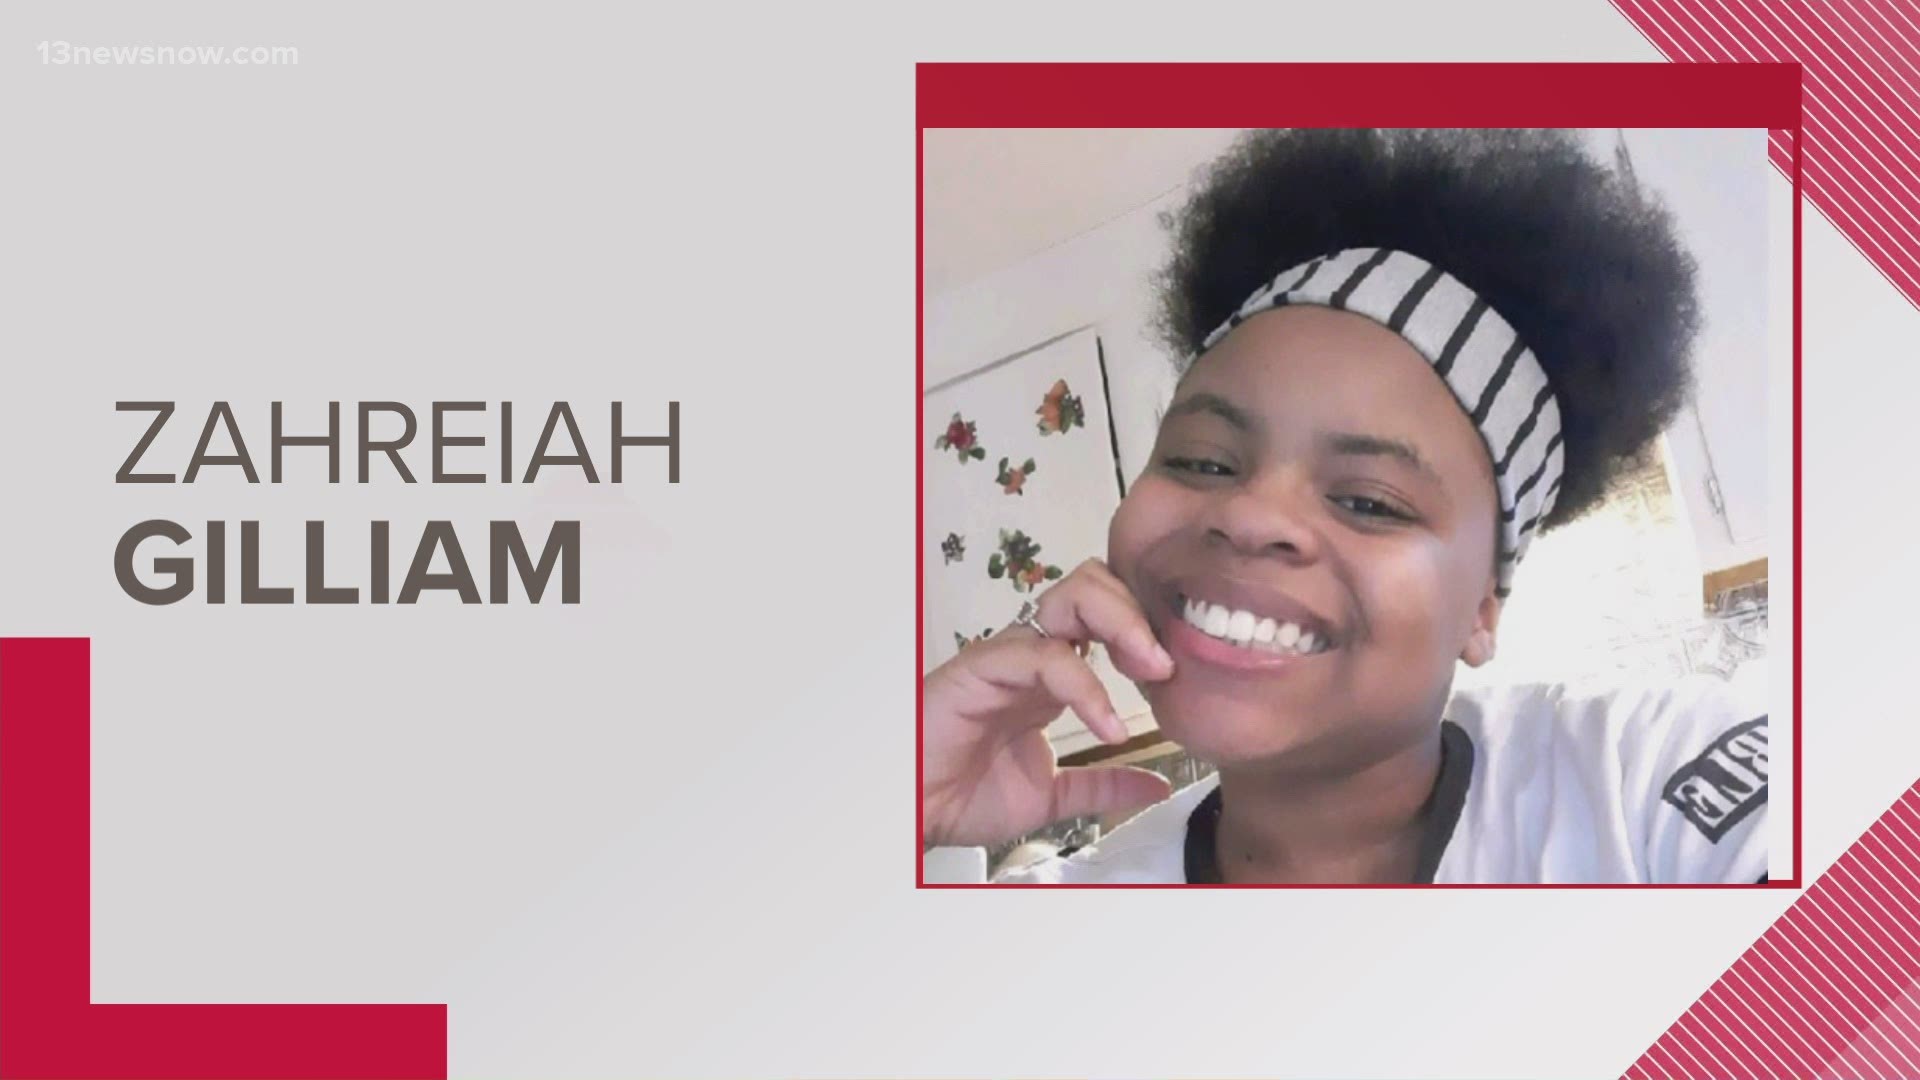 Franklin police said 17-year-old Zahreiah Gilliam has been missing since Monday evening. She is described as a black teen who stands 4-feet 9-inches tall.